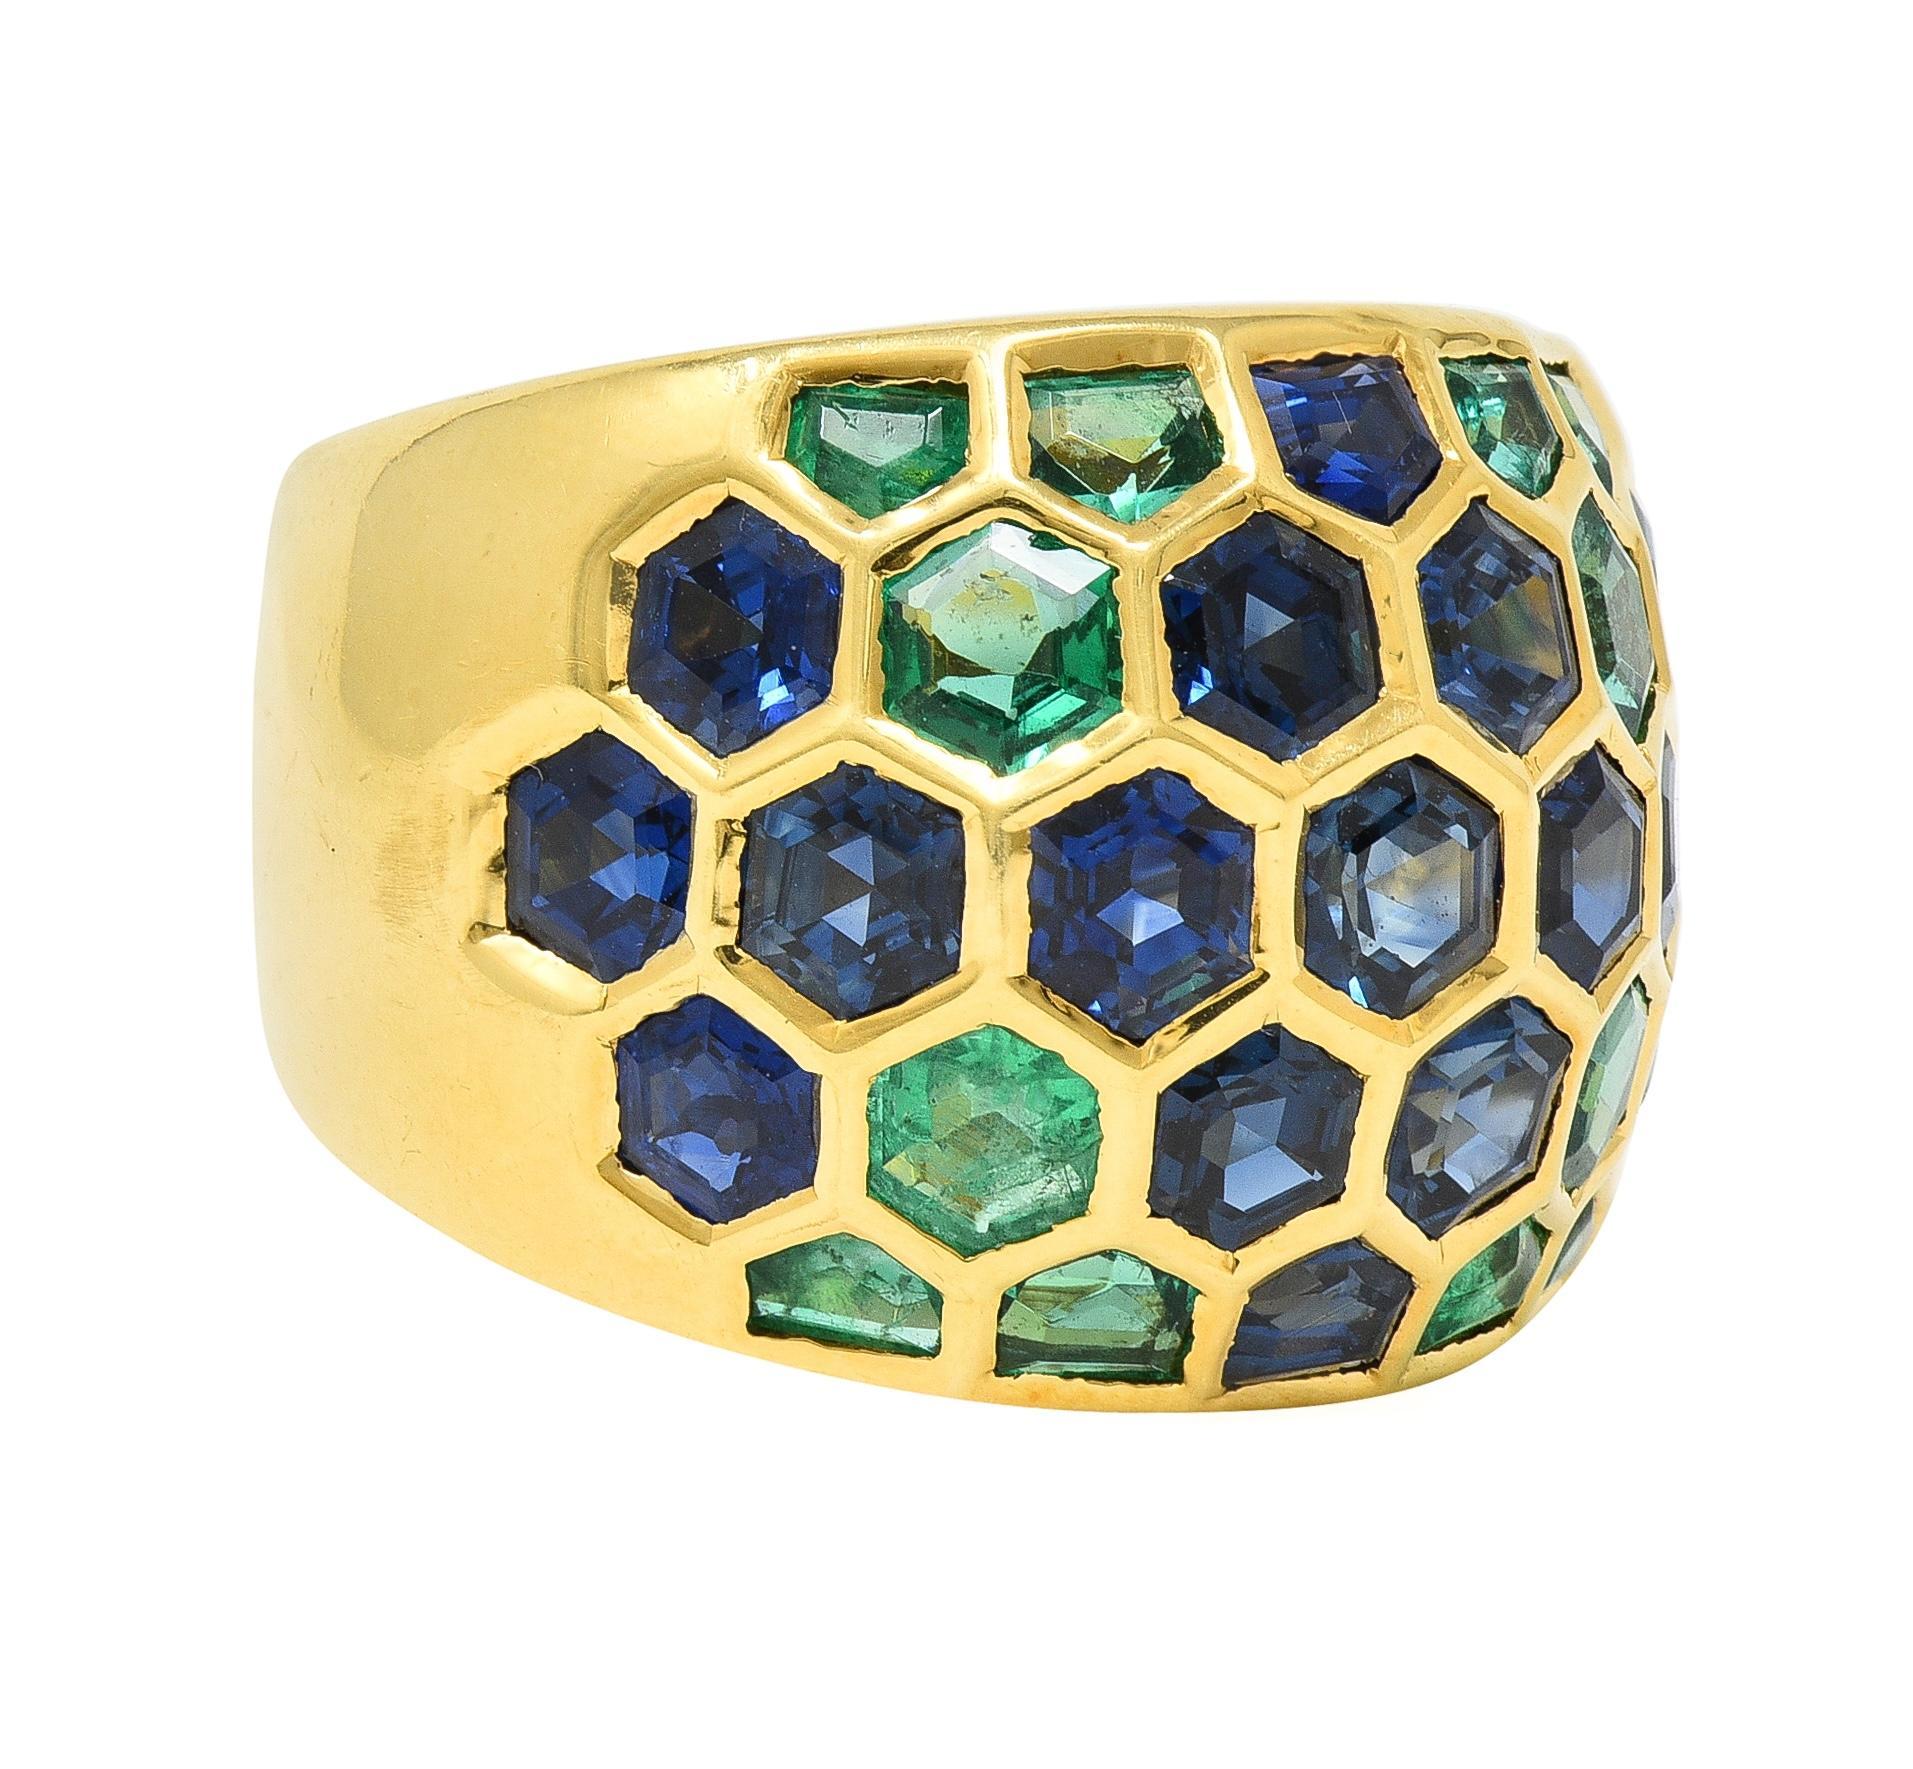 Designed as a domed gold form featuring flush set hexagonal shaped emeralds and sapphires
Emeralds weigh approximately 1.71 carats total - transparent medium green
Sapphires weigh approximately 4.76 carats total - transparent dark blue
With wide